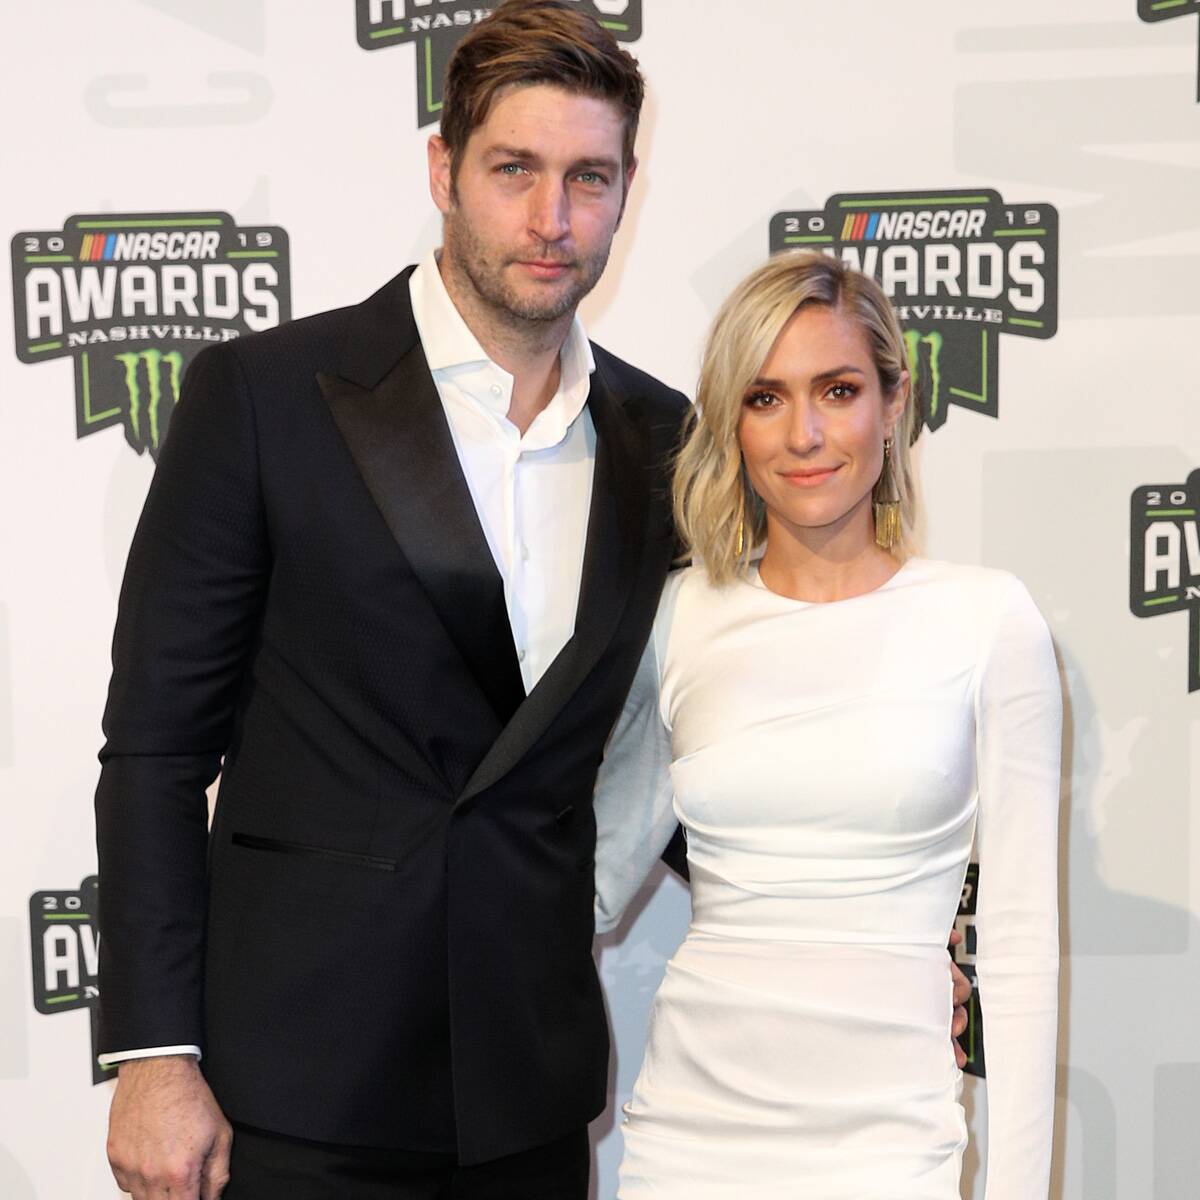 Kristin Cavallari and Jay Cutler Reunite, But It's Not What You Think